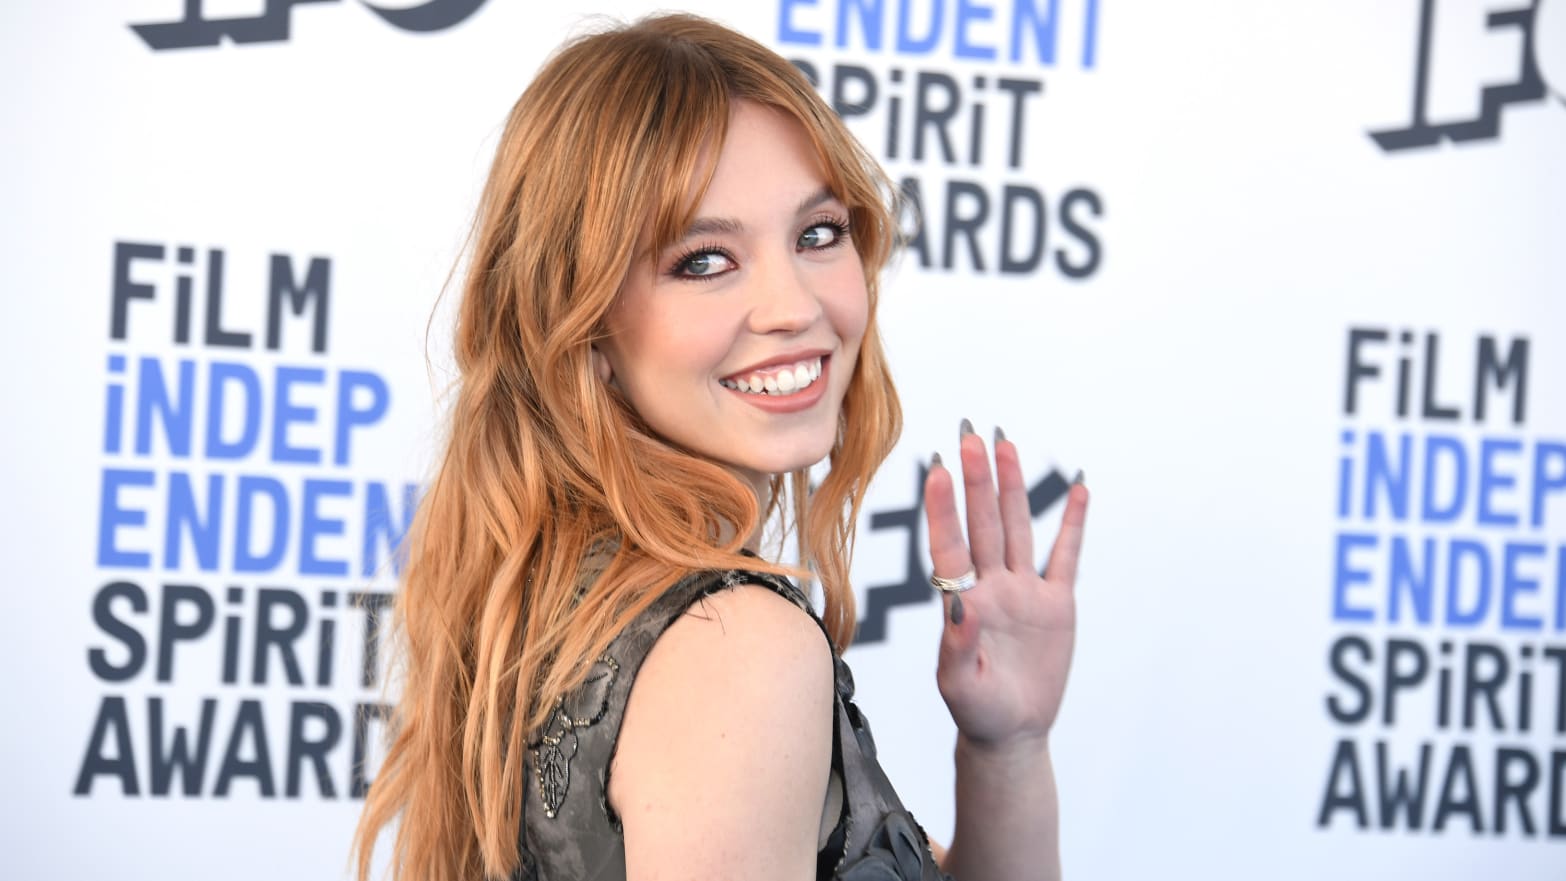 Sydney Sweeney waves to the camera at the Spirit Awards in 2022.